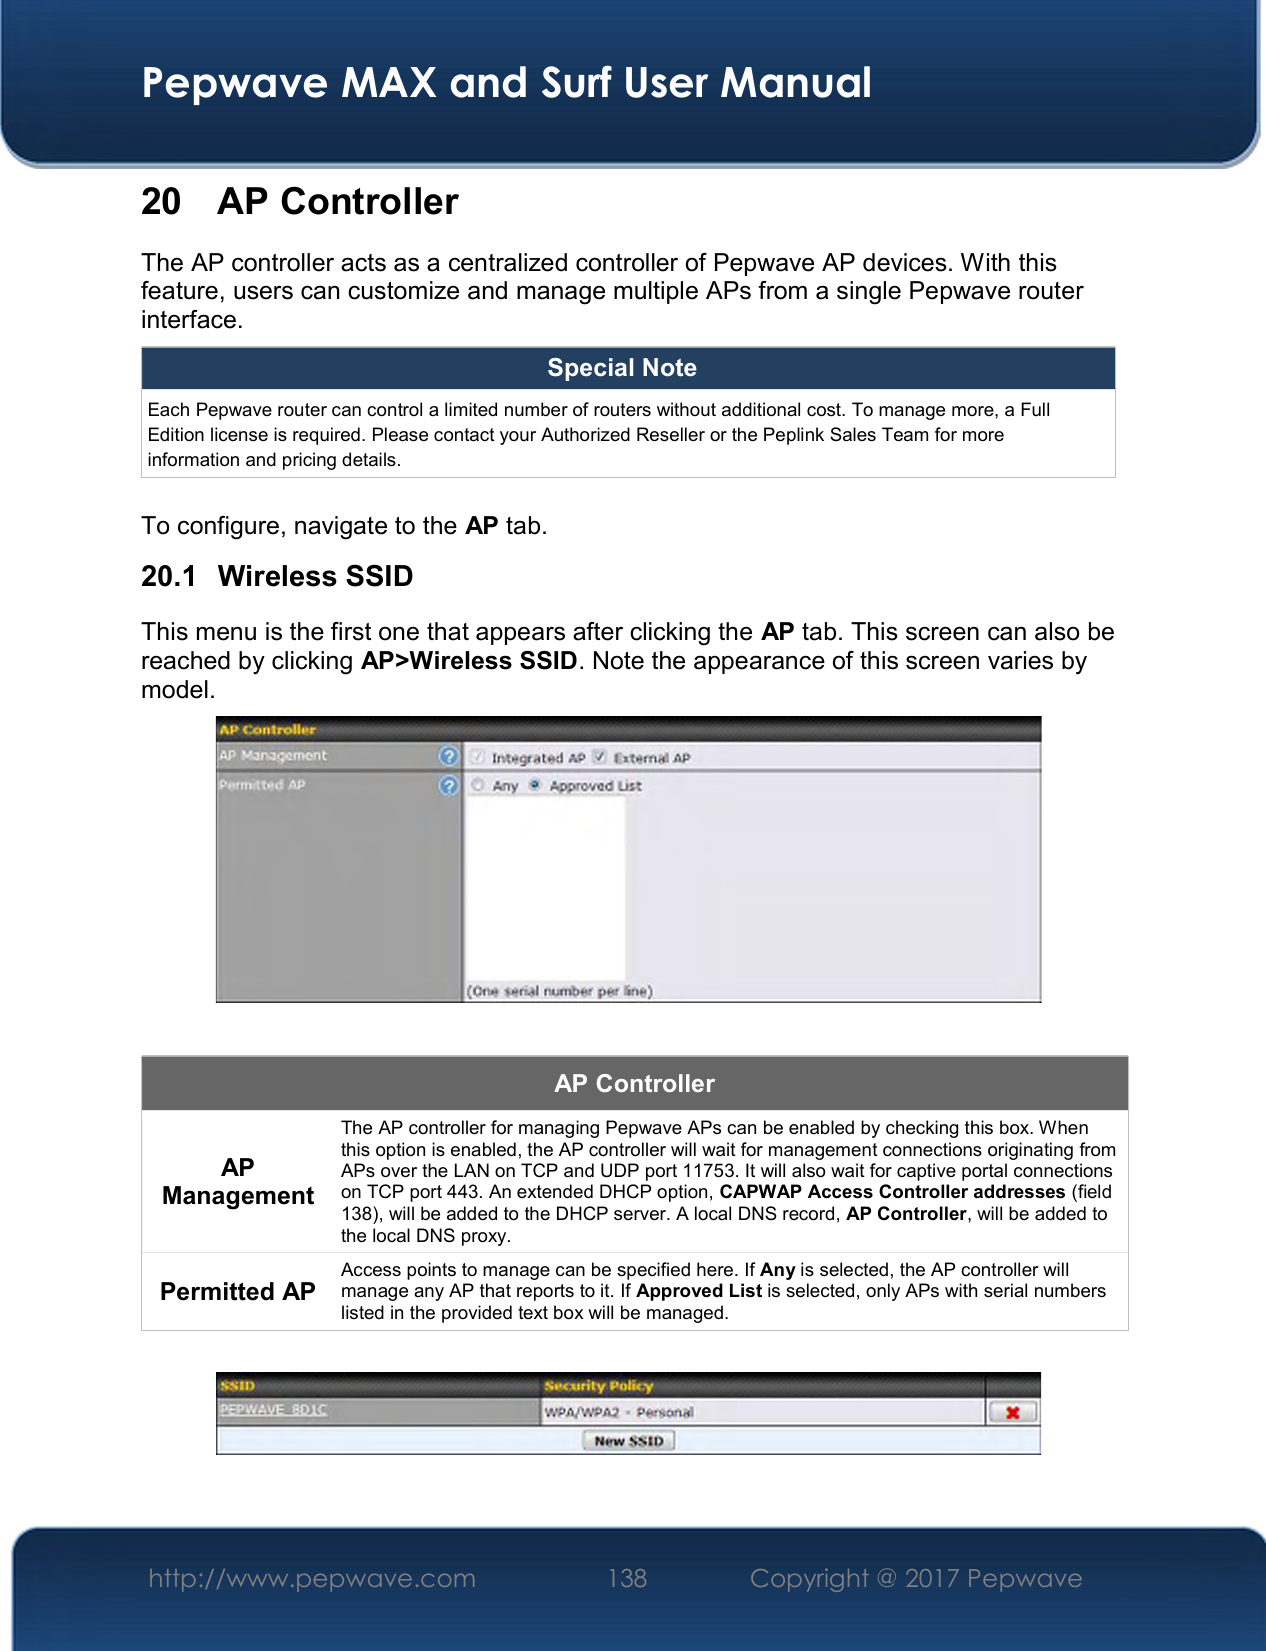  Pepwave MAX and Surf User Manual http://www.pepwave.com  138    Copyright @ 2017 Pepwave   20  AP Controller The AP controller acts as a centralized controller of Pepwave AP devices. With this feature, users can customize and manage multiple APs from a single Pepwave router interface. Special Note Each Pepwave router can control a limited number of routers without additional cost. To manage more, a Full Edition license is required. Please contact your Authorized Reseller or the Peplink Sales Team for more information and pricing details.  To configure, navigate to the AP tab. 20.1  Wireless SSID This menu is the first one that appears after clicking the AP tab. This screen can also be reached by clicking AP&gt;Wireless SSID. Note the appearance of this screen varies by model.   AP Controller AP Management The AP controller for managing Pepwave APs can be enabled by checking this box. When this option is enabled, the AP controller will wait for management connections originating from APs over the LAN on TCP and UDP port 11753. It will also wait for captive portal connections on TCP port 443. An extended DHCP option, CAPWAP Access Controller addresses (field 138), will be added to the DHCP server. A local DNS record, AP Controller, will be added to the local DNS proxy. Permitted AP  Access points to manage can be specified here. If Any is selected, the AP controller will manage any AP that reports to it. If Approved List is selected, only APs with serial numbers listed in the provided text box will be managed.   